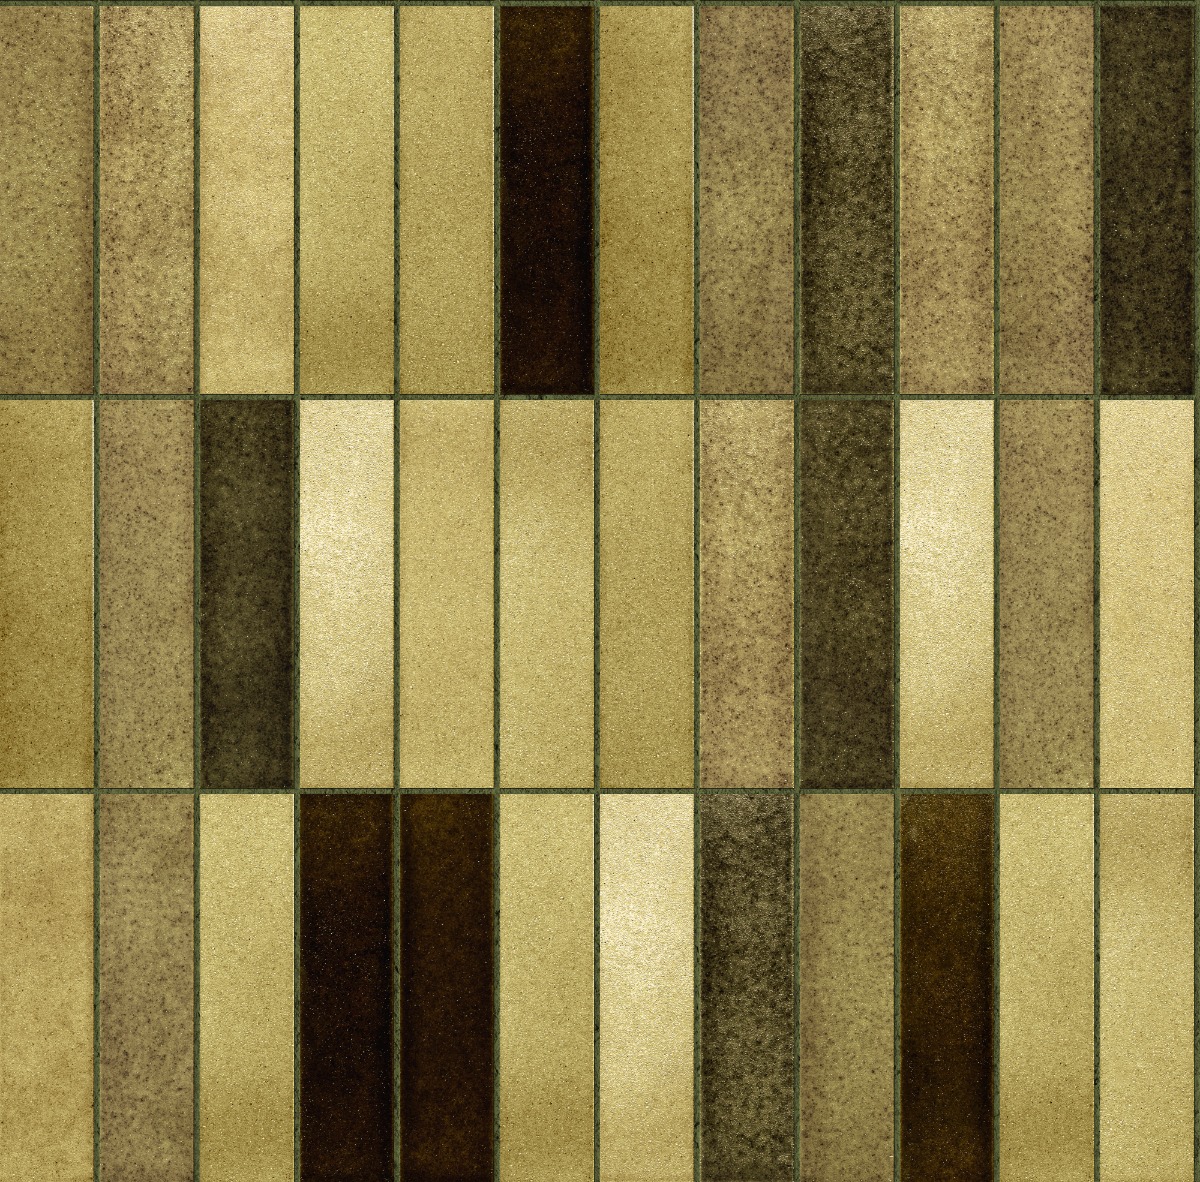 A seamless tile texture with excinere e tiles arranged in a  pattern